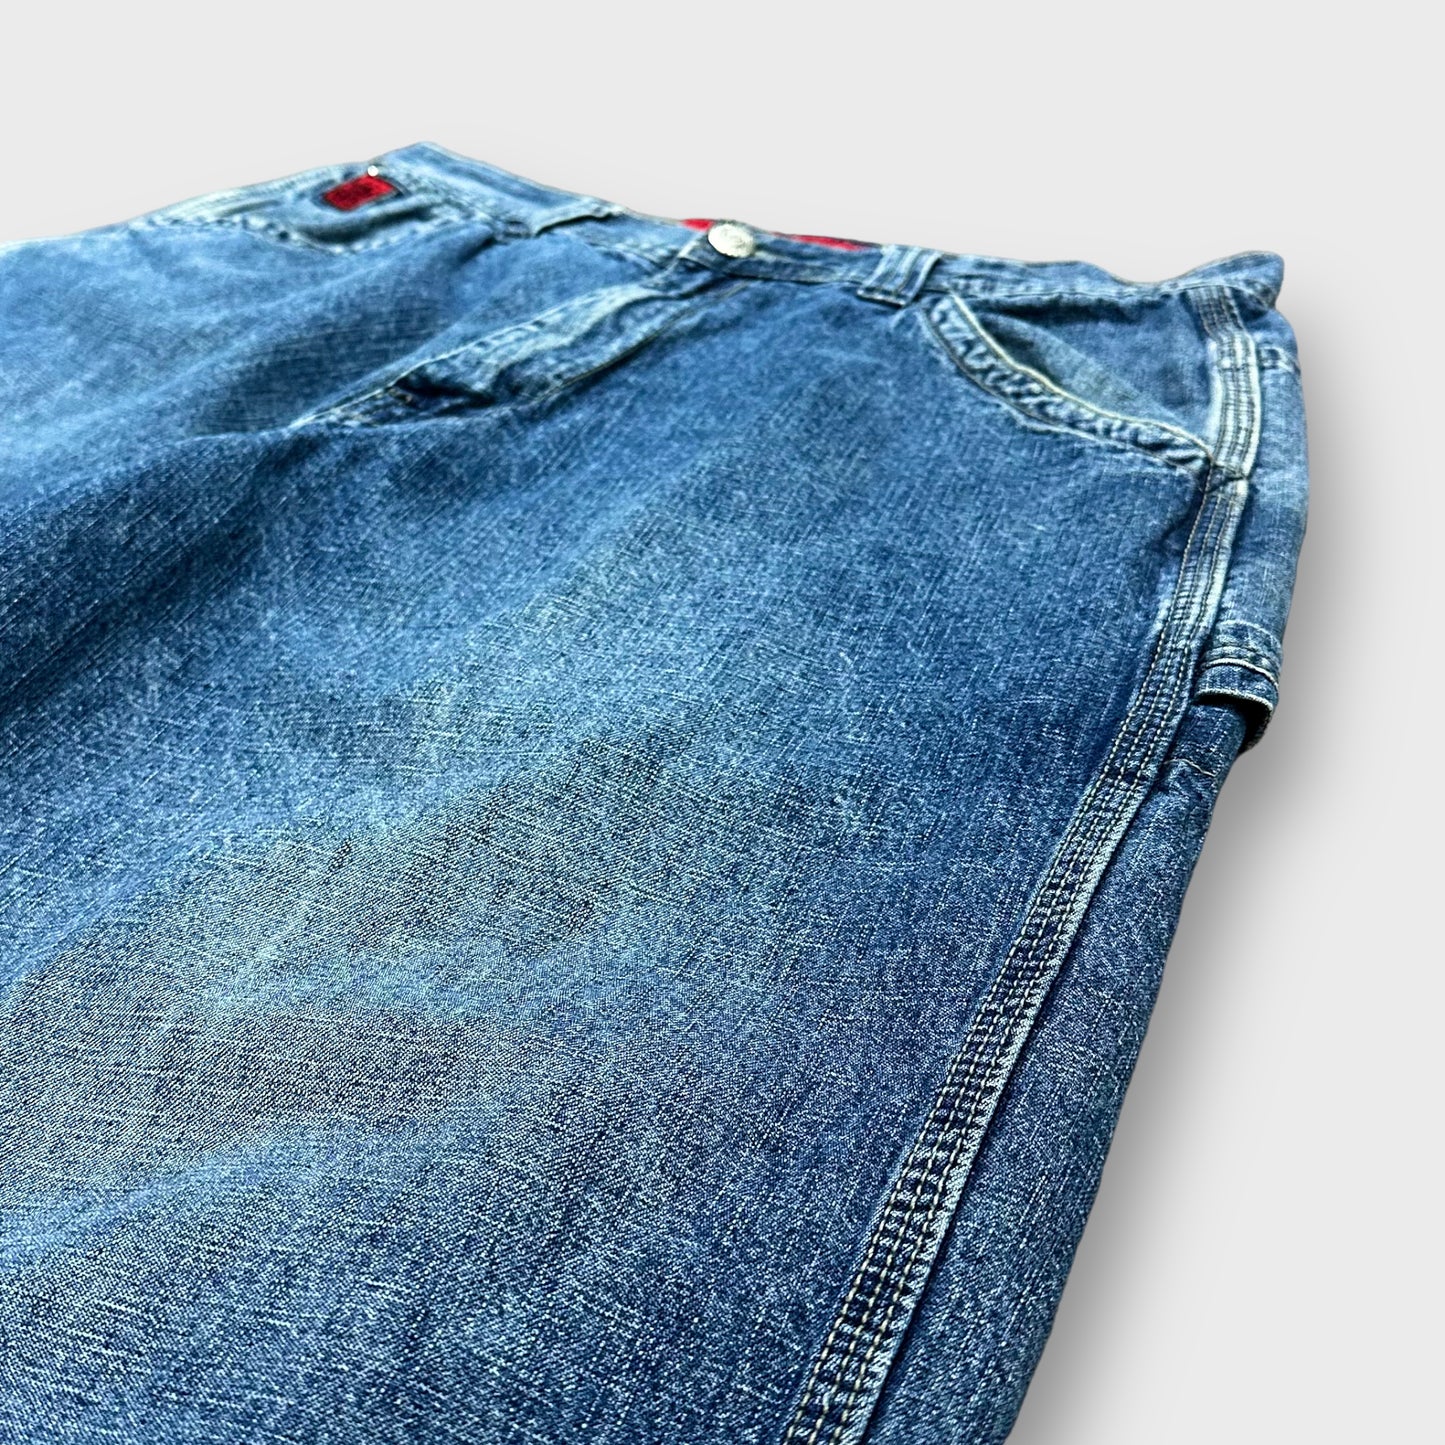 "JNCO JEANS" Embroidery wide denim pants